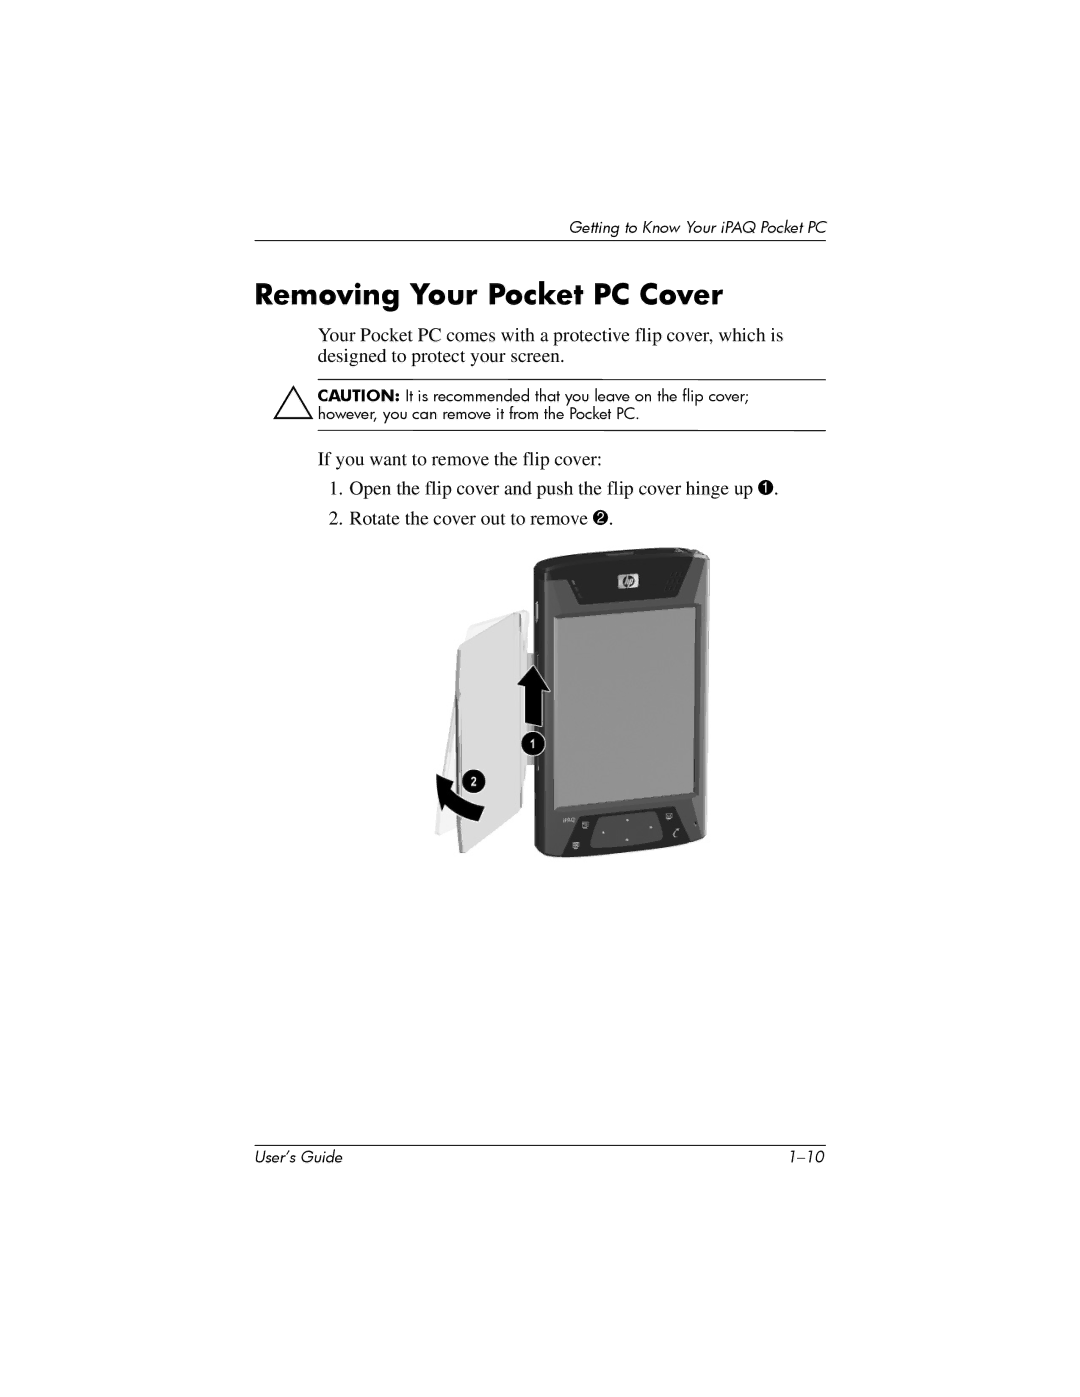 HP hx4700 manual Removing Your Pocket PC Cover 